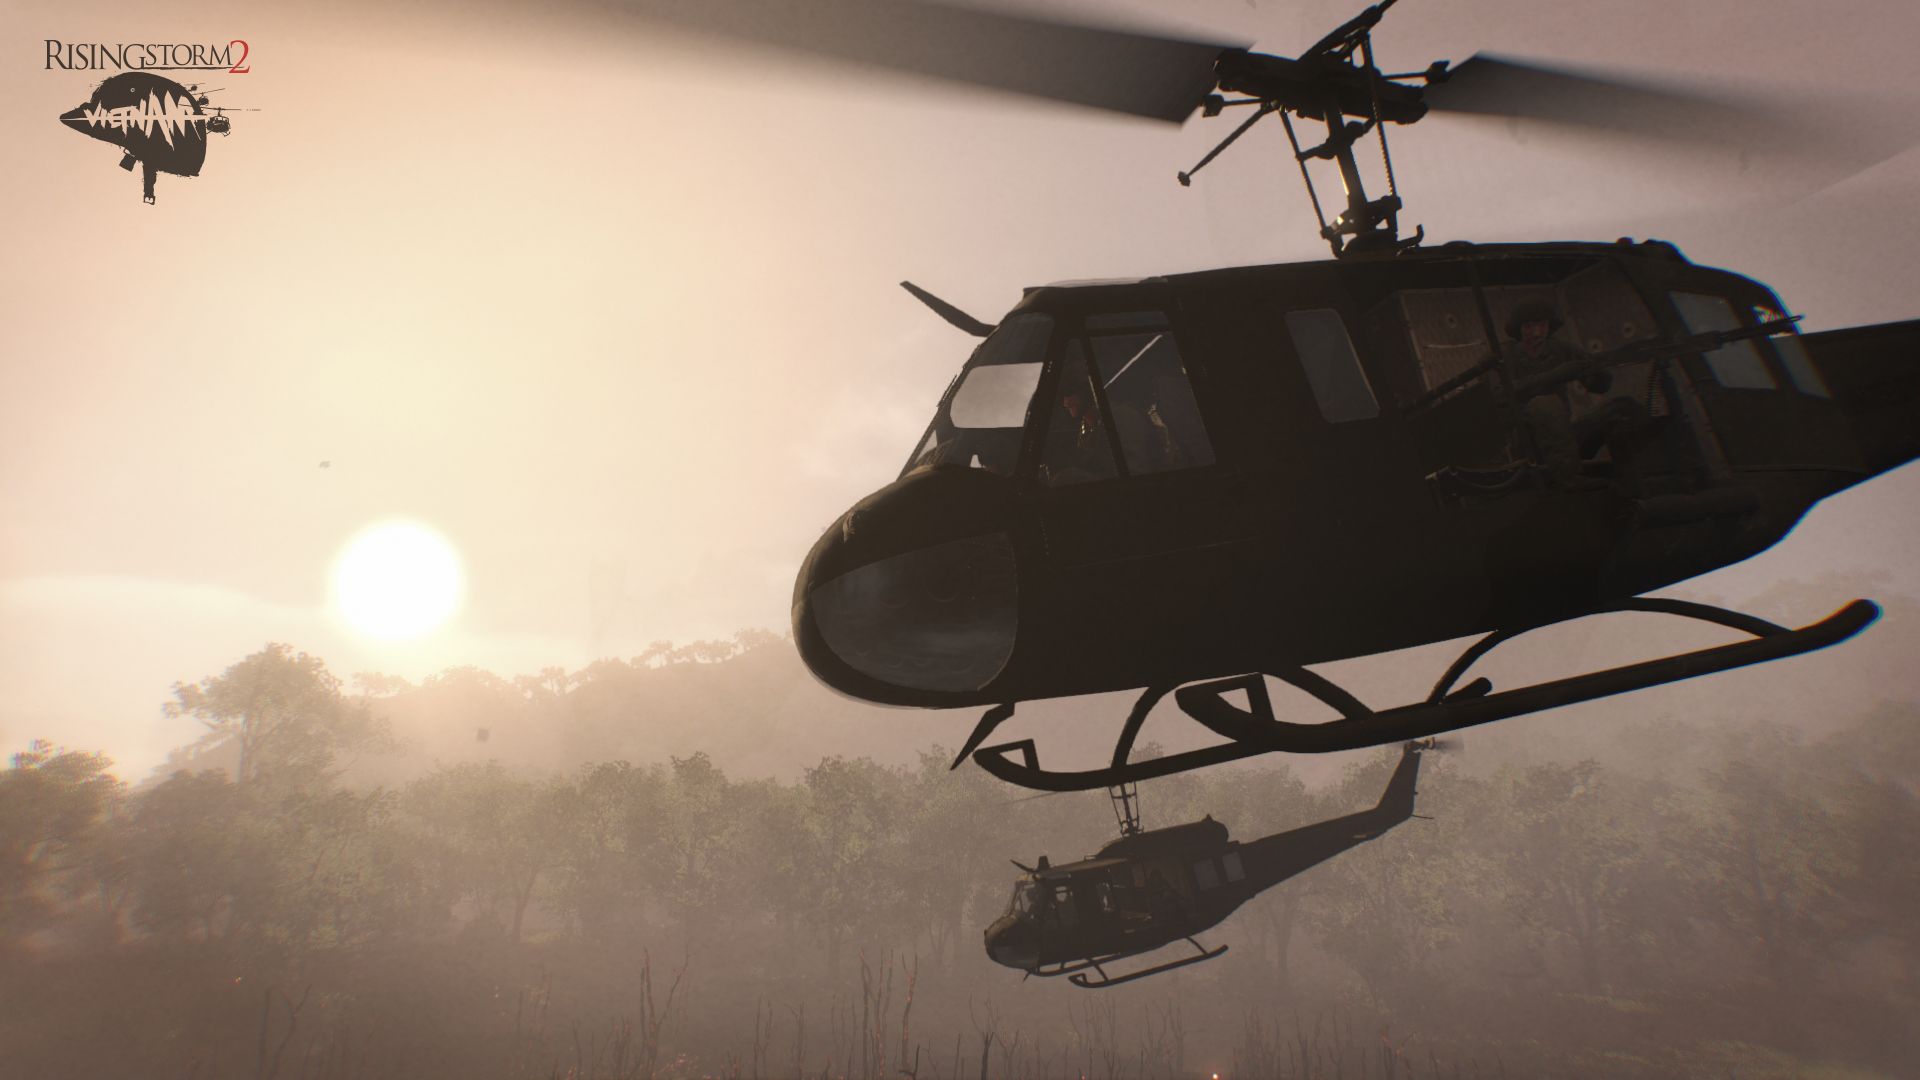 Tripwire Interactive shows off its namesake weapon in Rising Storm 2: Vietnam